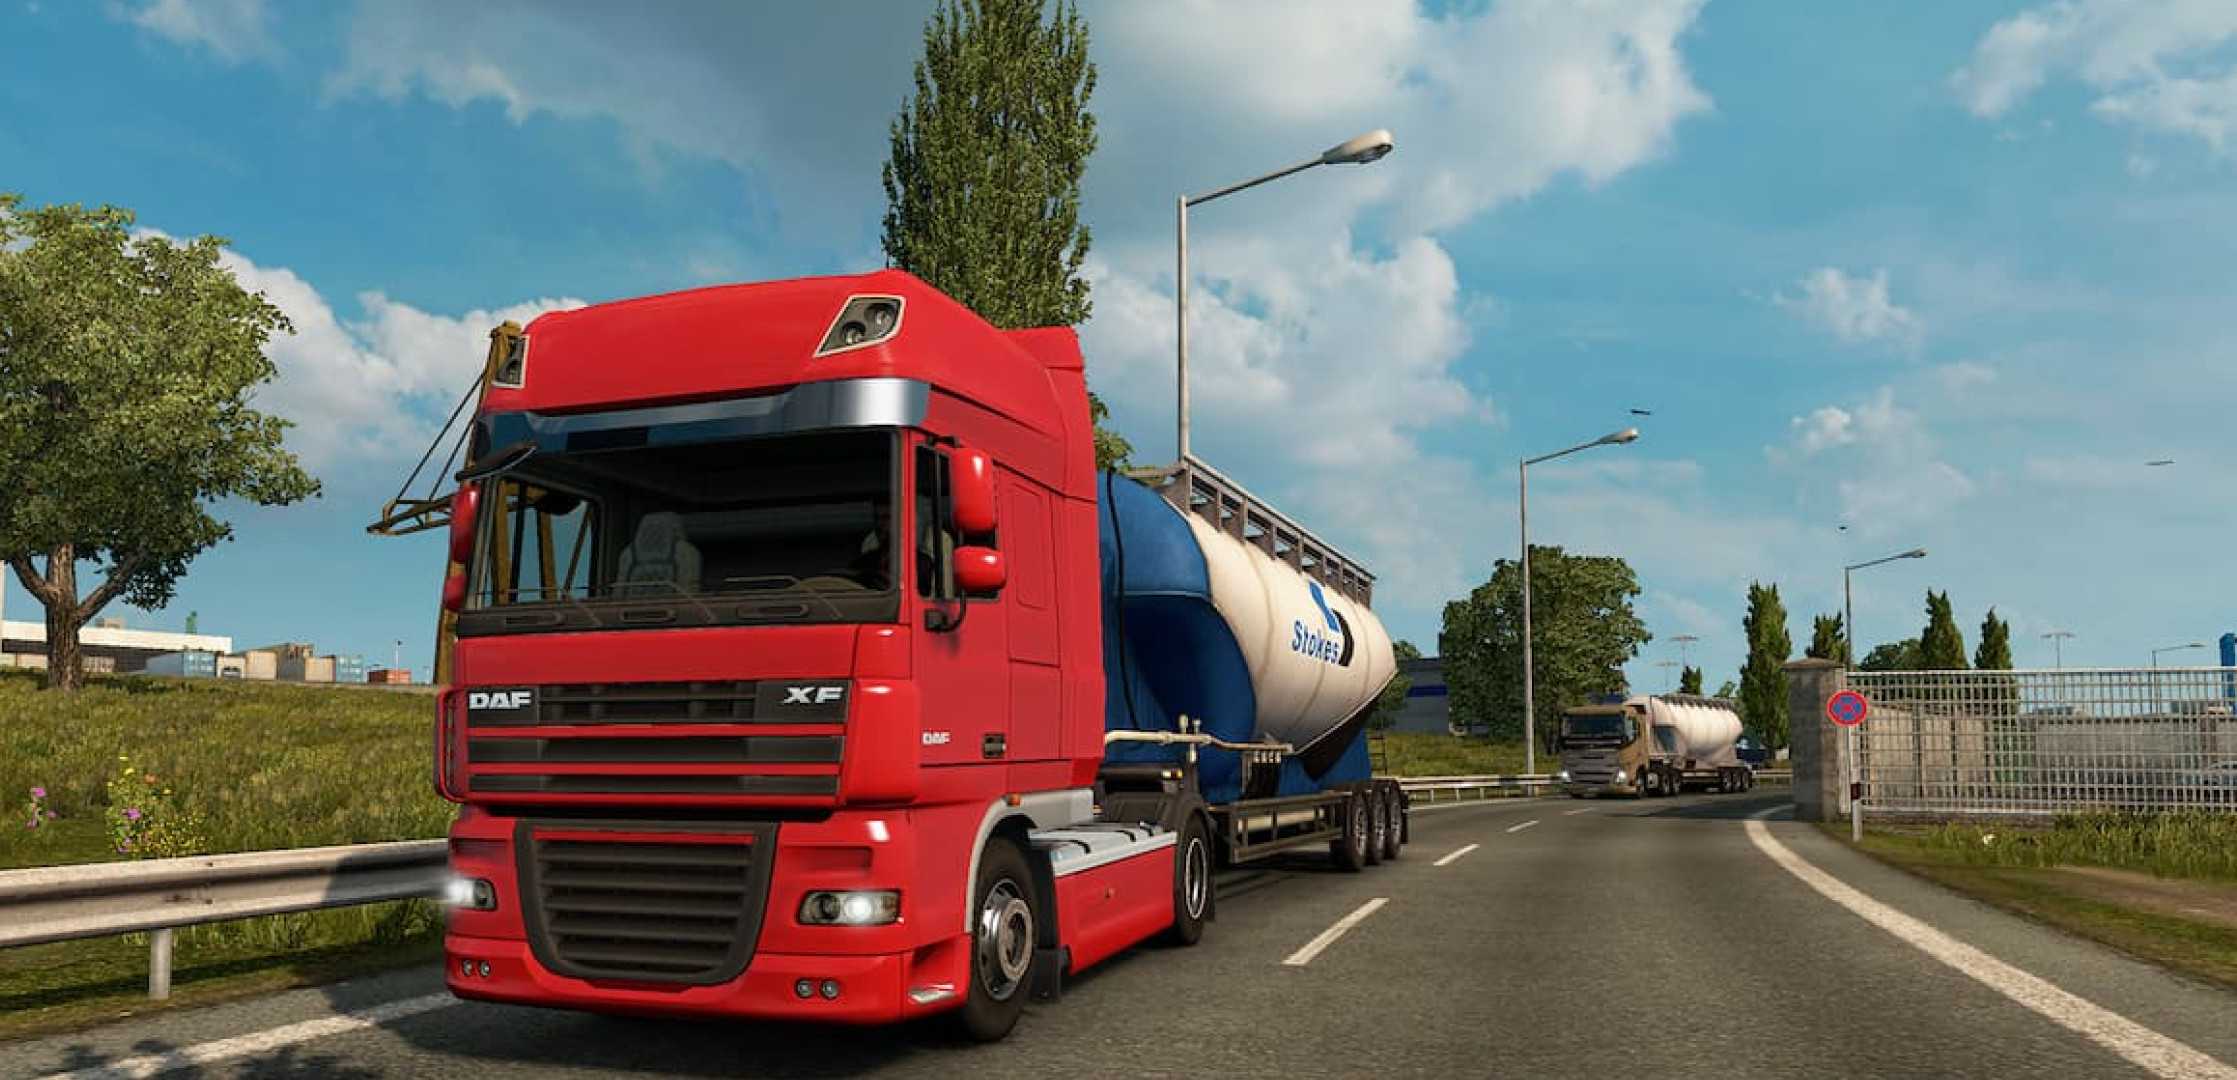 Download Truck Simulator - Truck Games on PC with MEmu